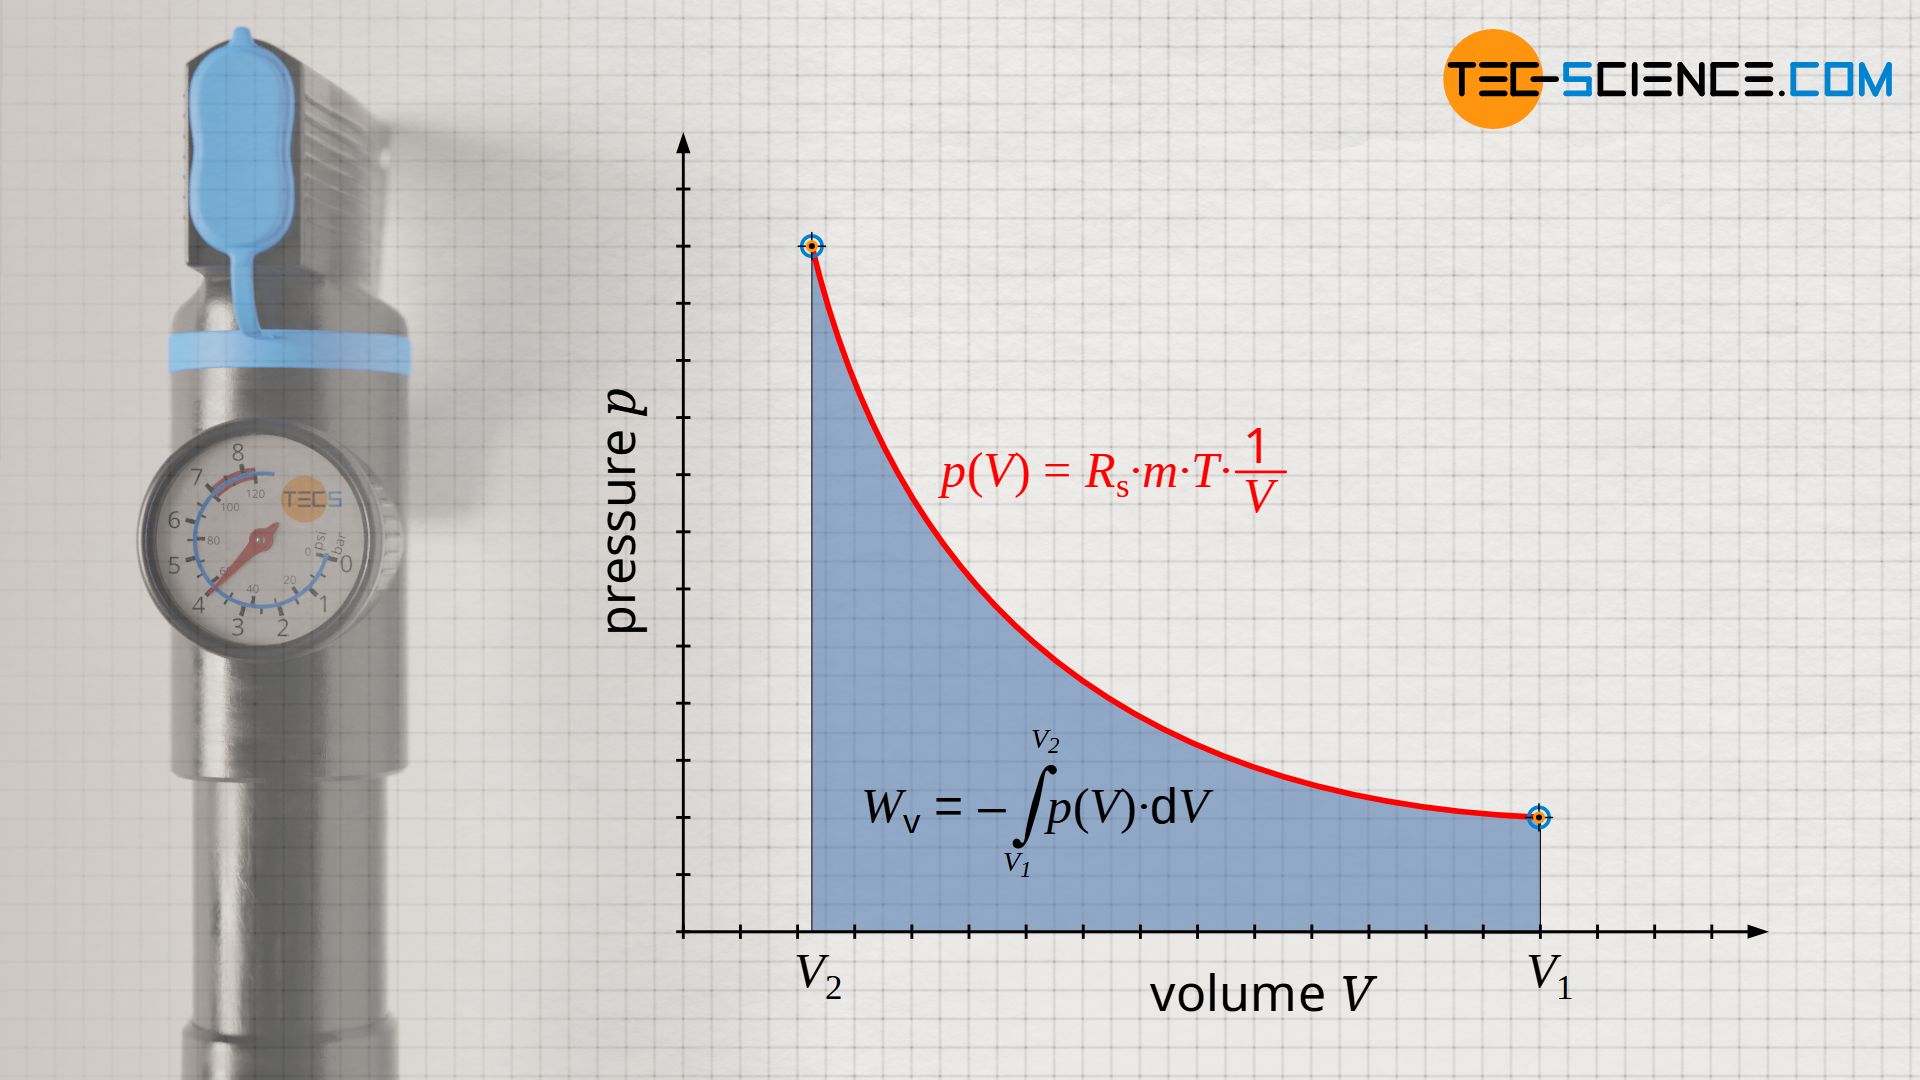 Calculation of the pressure-volume work for an isothermal process